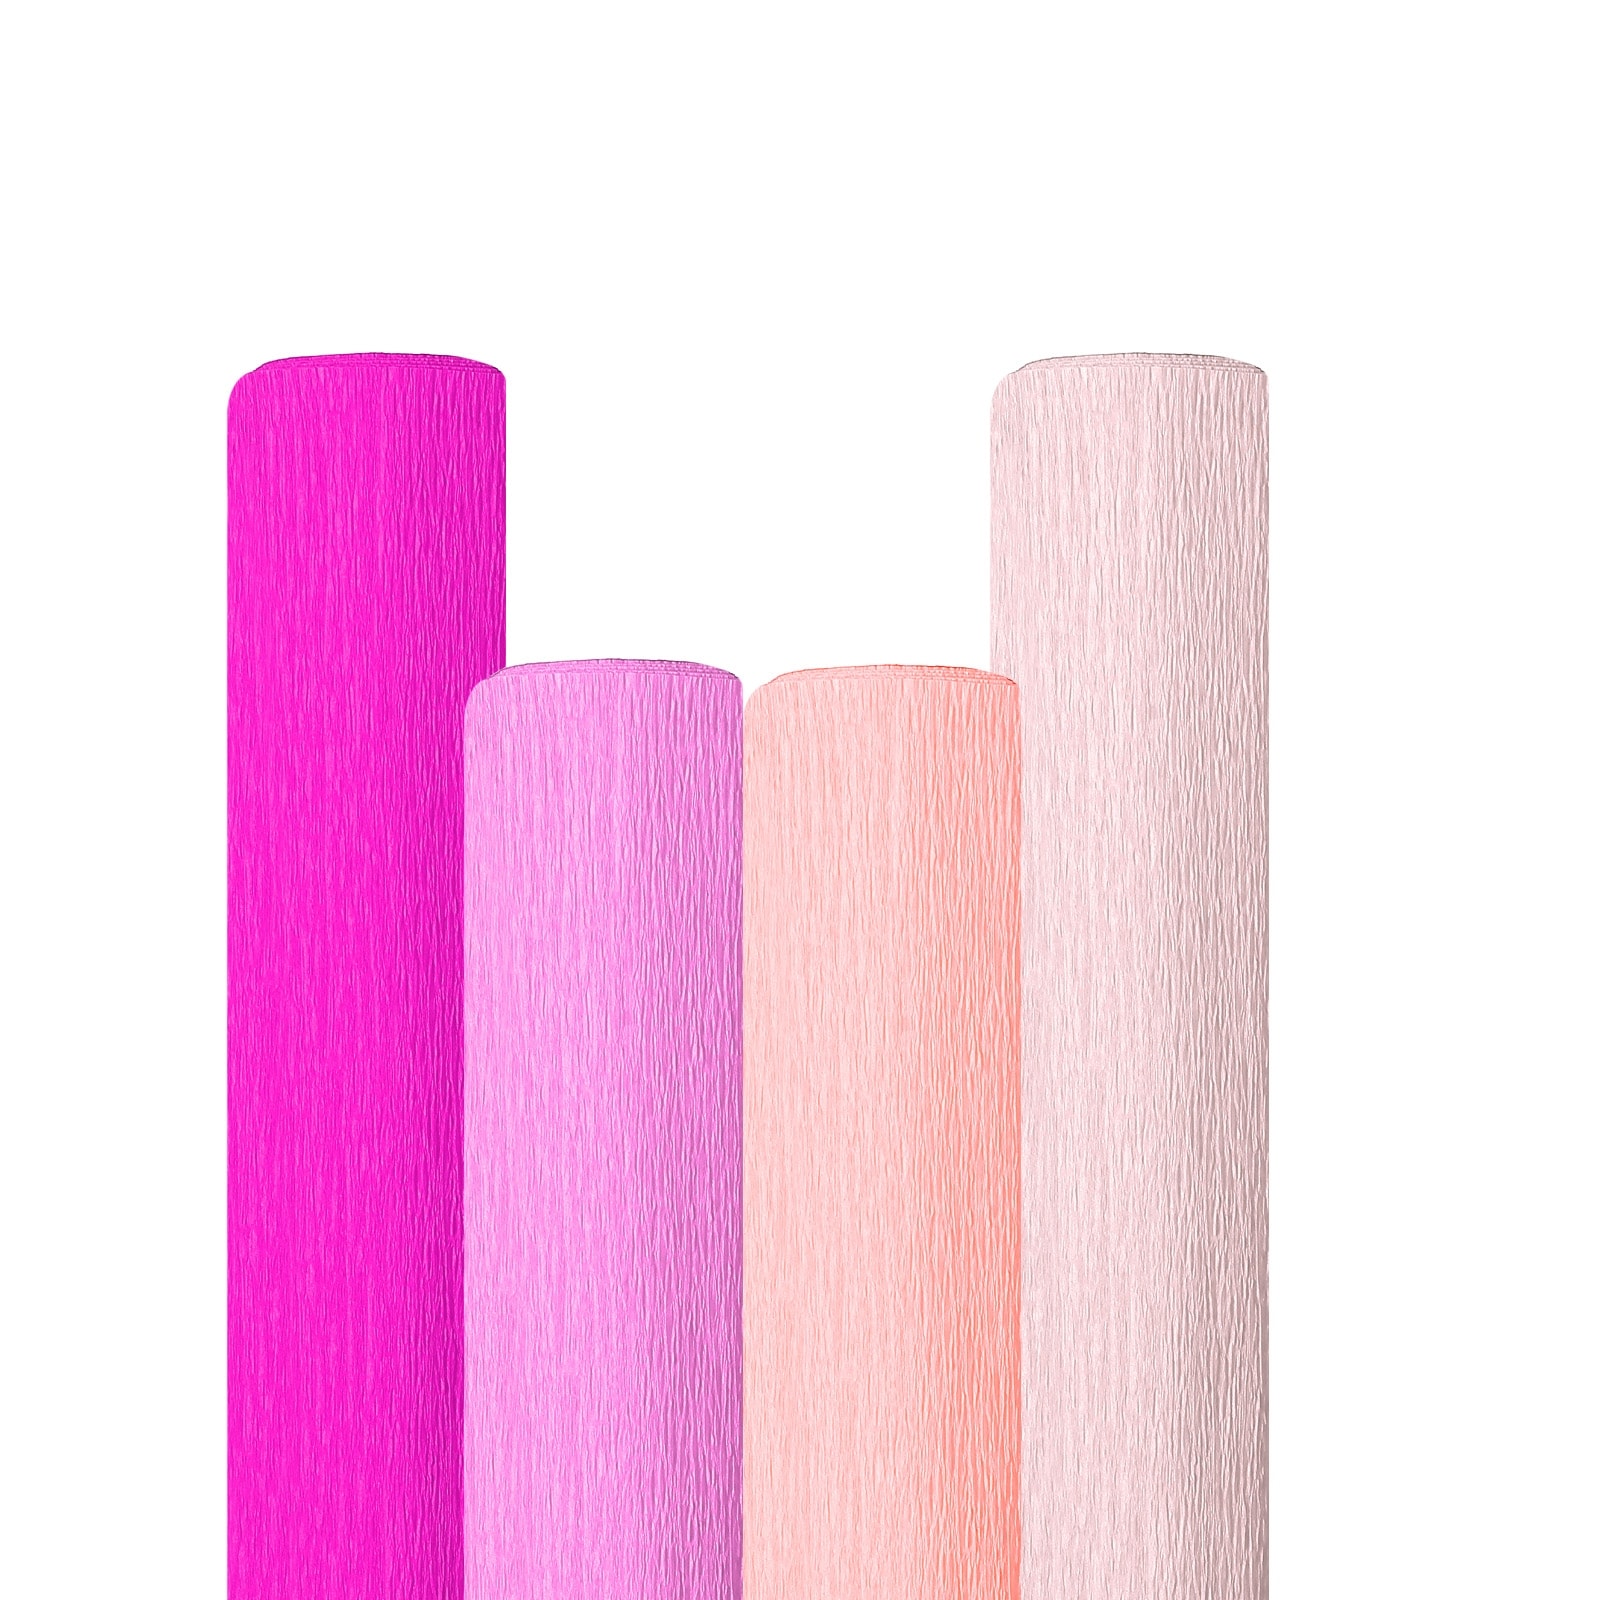 Crepe Paper Streamers 3 Rolls 7.5ft in 3 Colors for DIY Decorations(Light  Pink,Dark Pink,Hot Pink) 